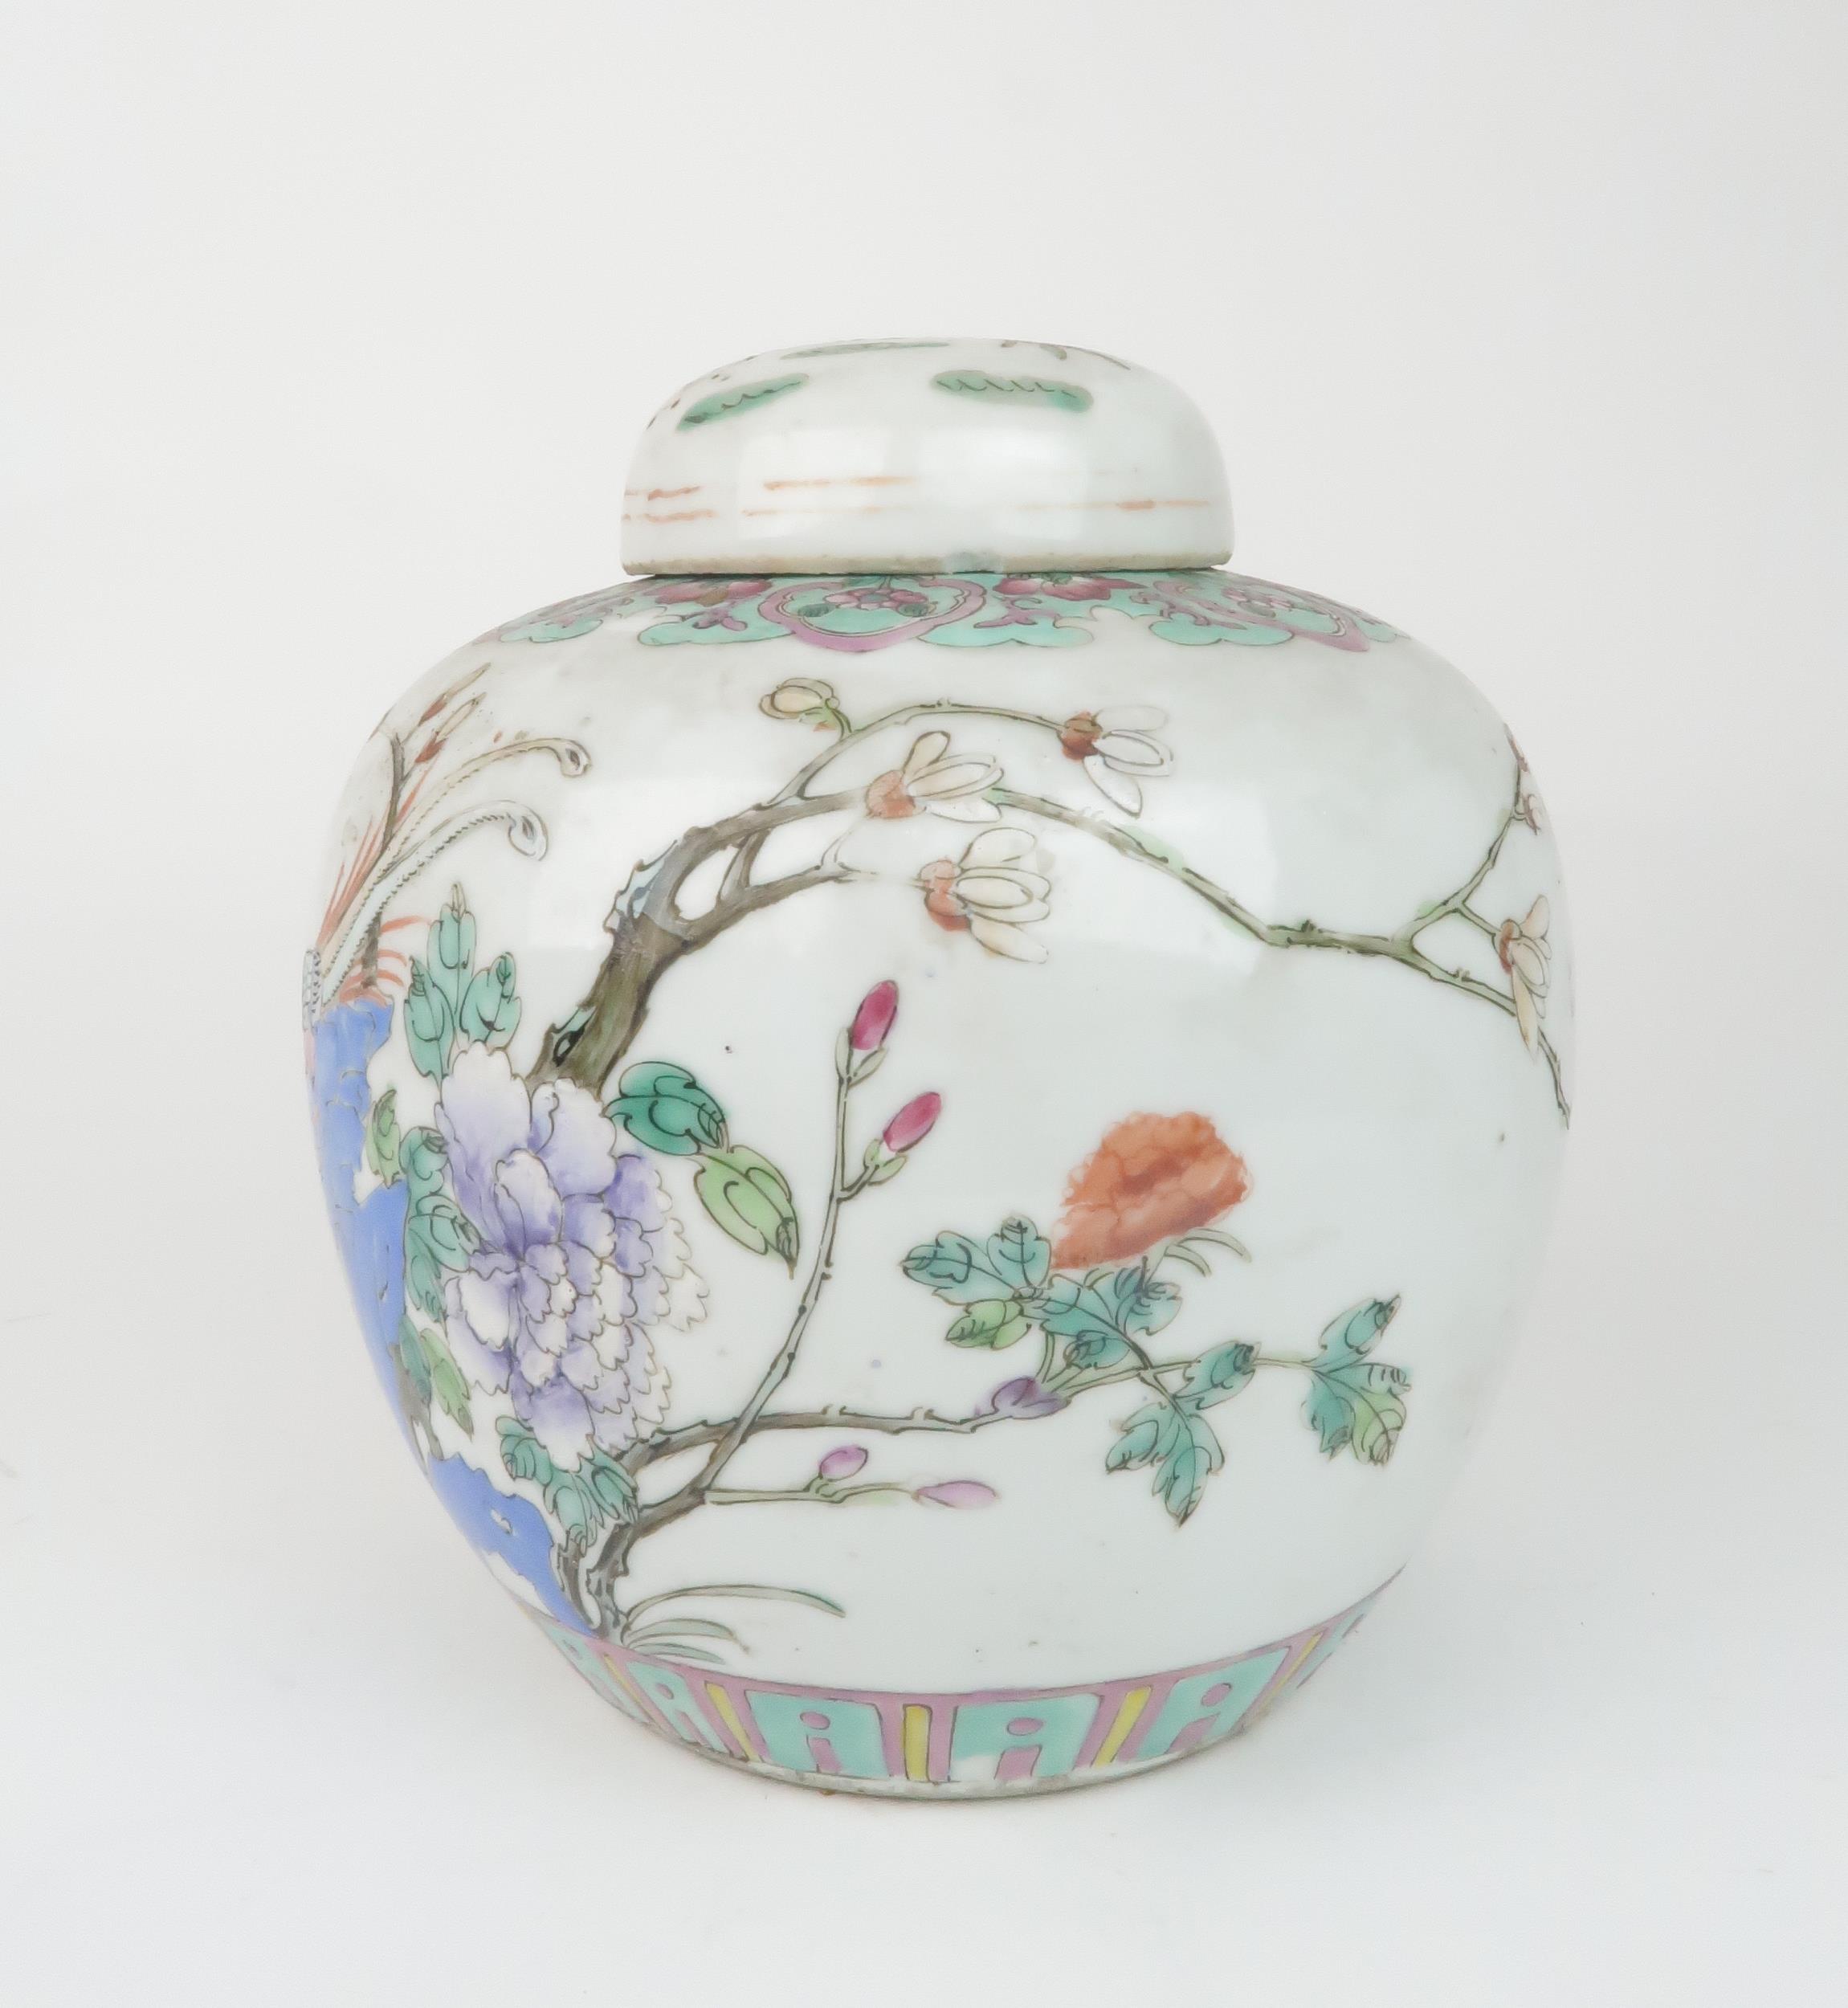 A CHINESE FAMILLE ROSE GINGER JAR AND COVER  painted with birds amongst foliage within formal bands, - Image 2 of 6